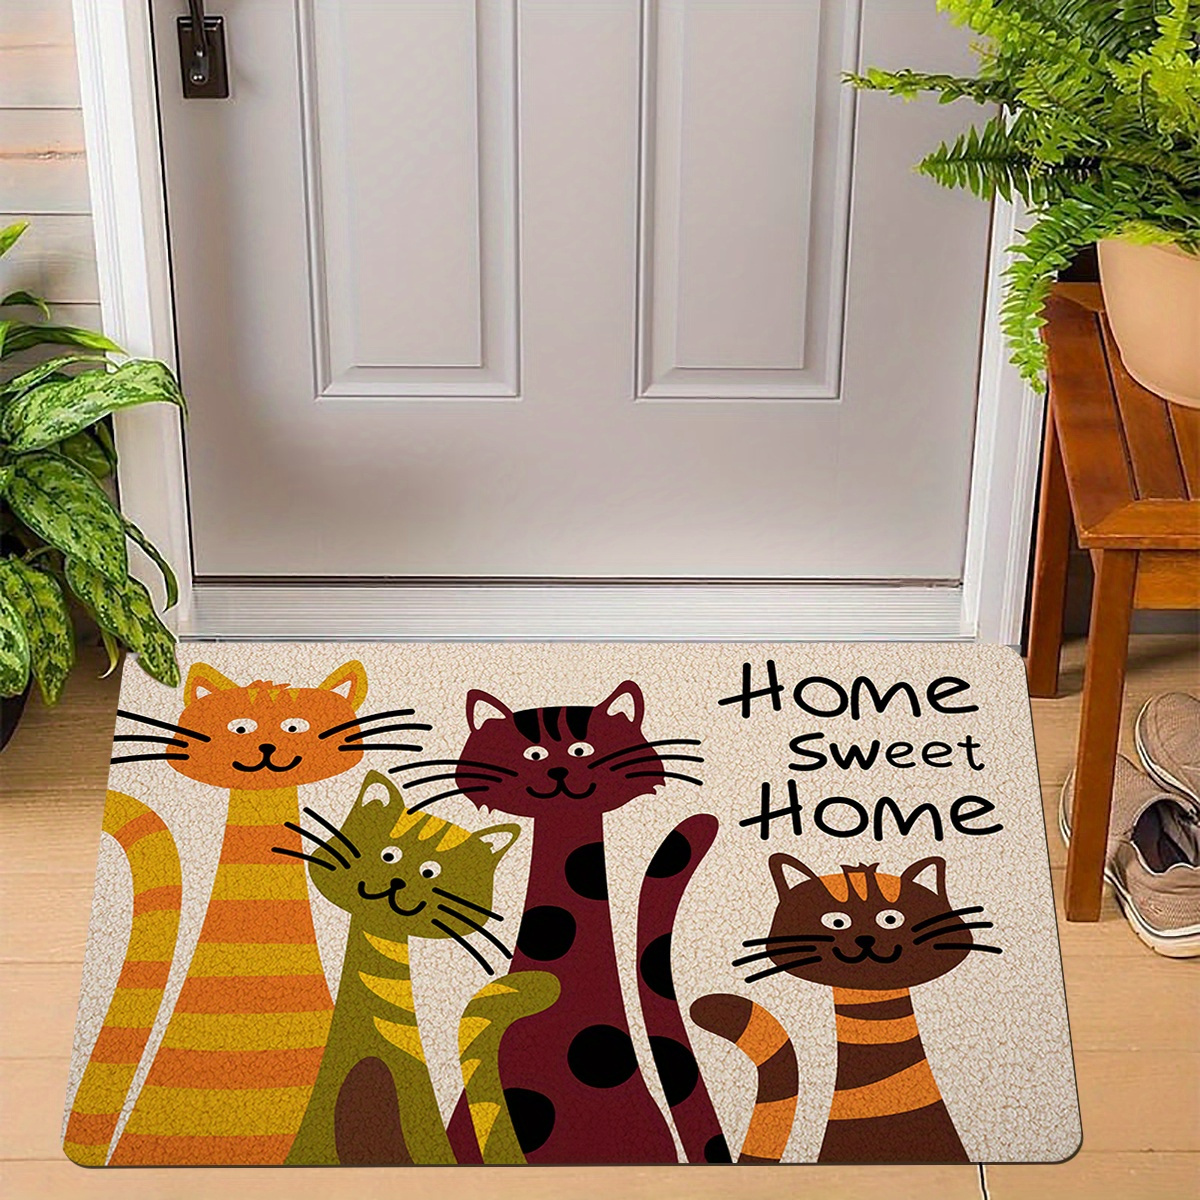 

Cute Cartoon Kitten & Letter Print Door Mat - Anti-slip, Stain-resistant Polyester With Soft Sponge Backing For Kitchen, Entryway, Living Room, Balcony - Perfect For Home Decor